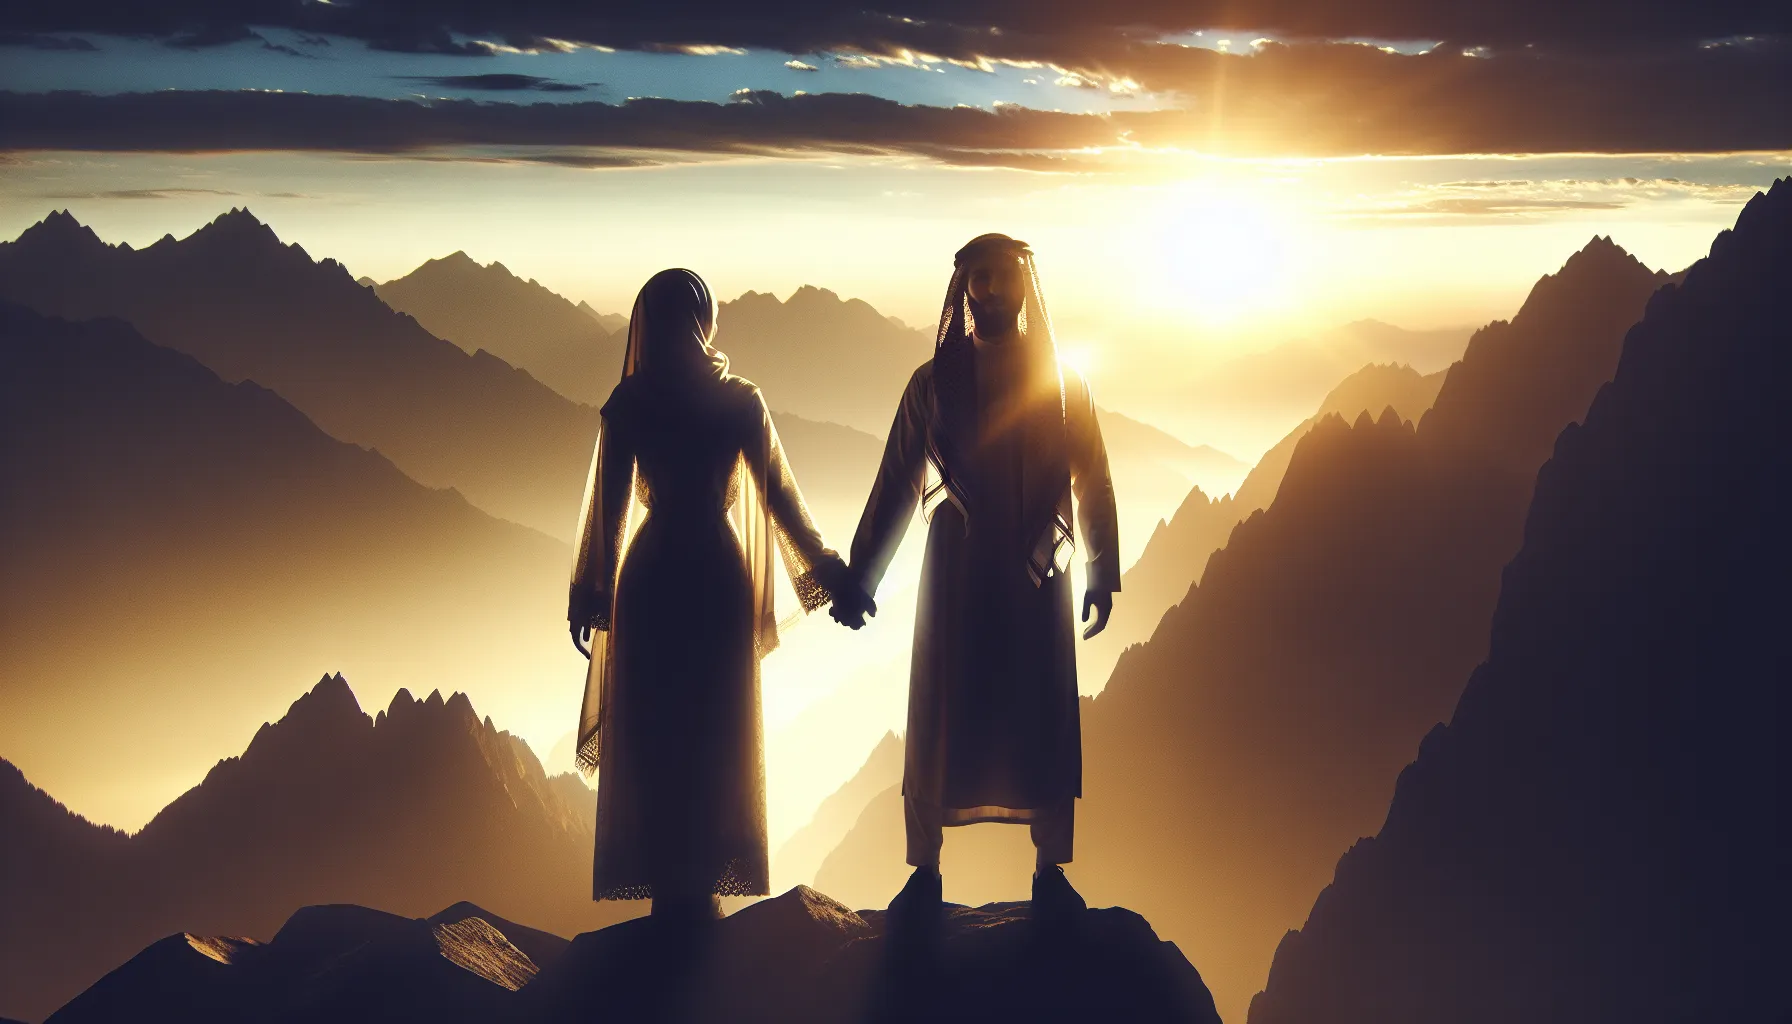 Atop the summit, hand in hand, a couple stands bathed in the dawn's first light—symbols of unity and exploration, their shared journey echoing the peaks and valleys of love itself.